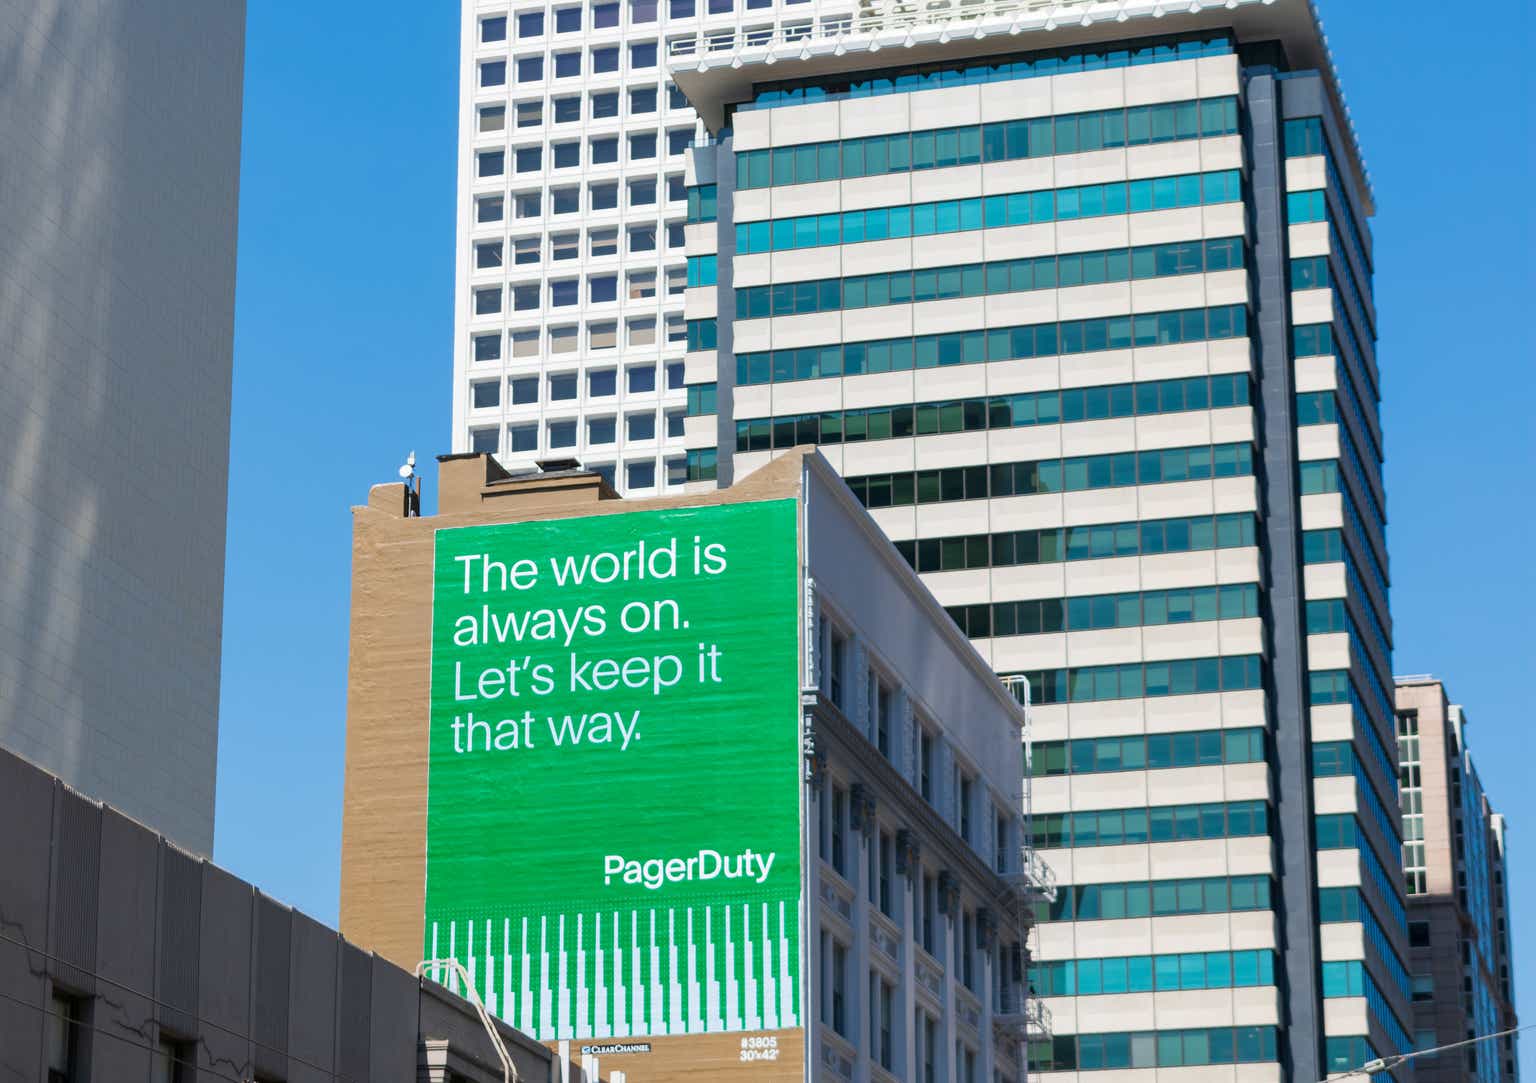 PagerDuty: Fast Growth With Bottom Line Expansion